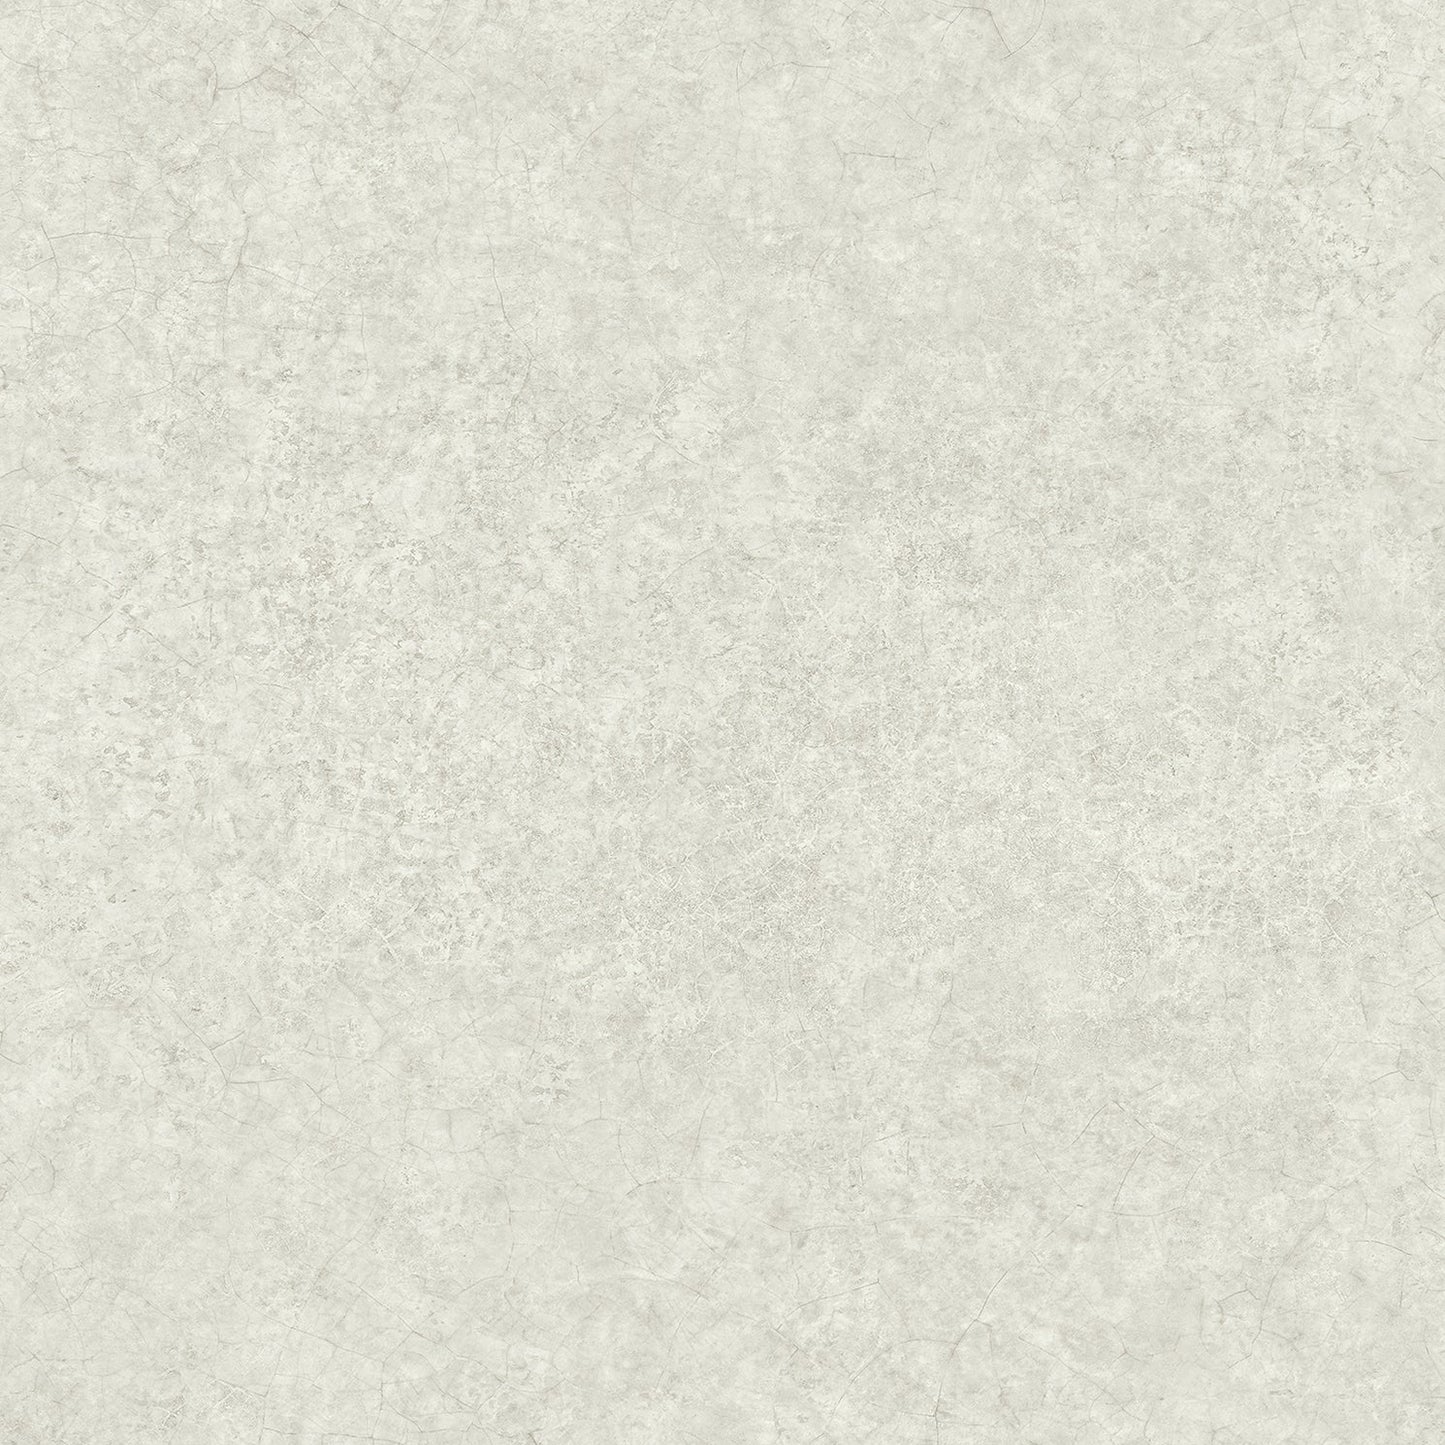 Acquire 4020-69207 Geo & Textures Clyde Taupe Quartz Taupe by Advantage